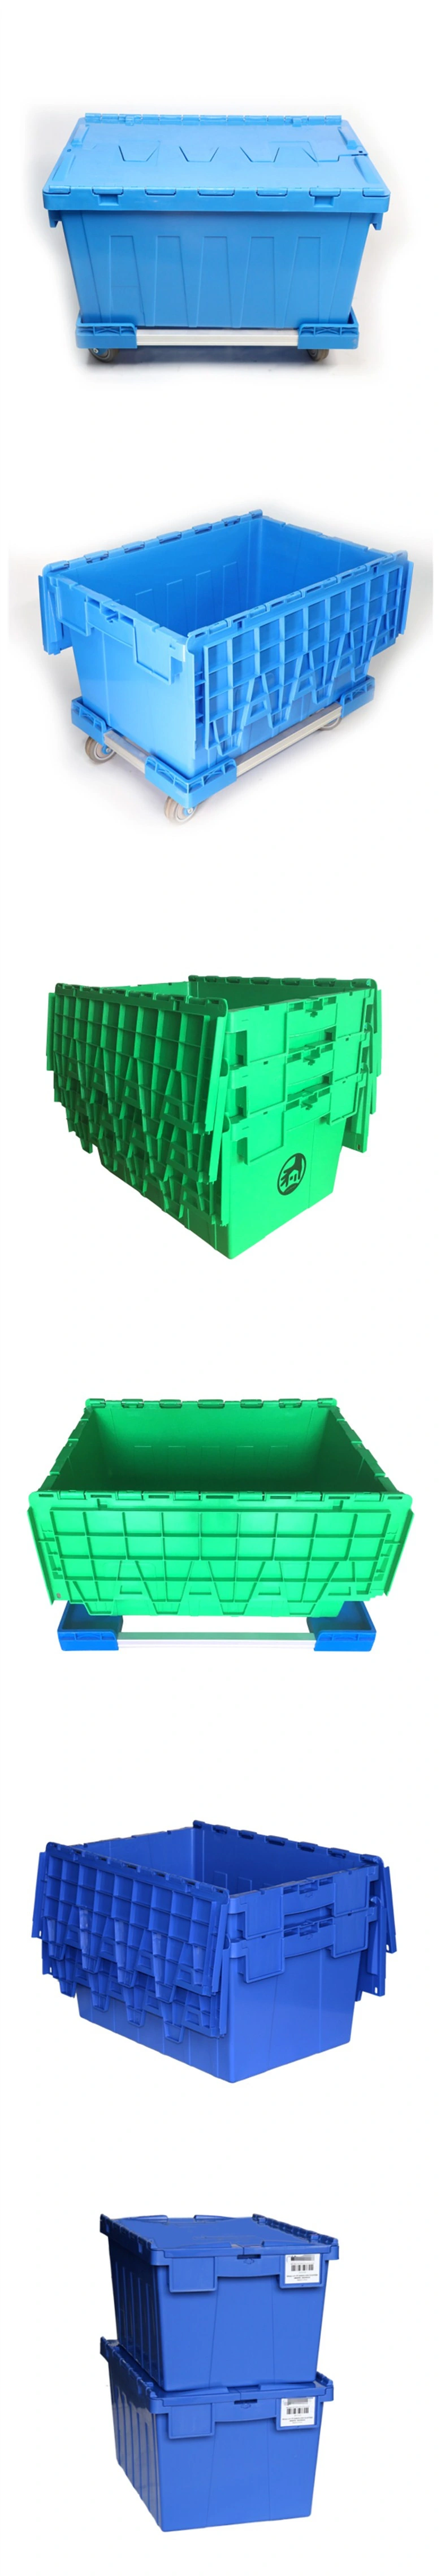 Nesting and Stacking Storage Crate for Moving